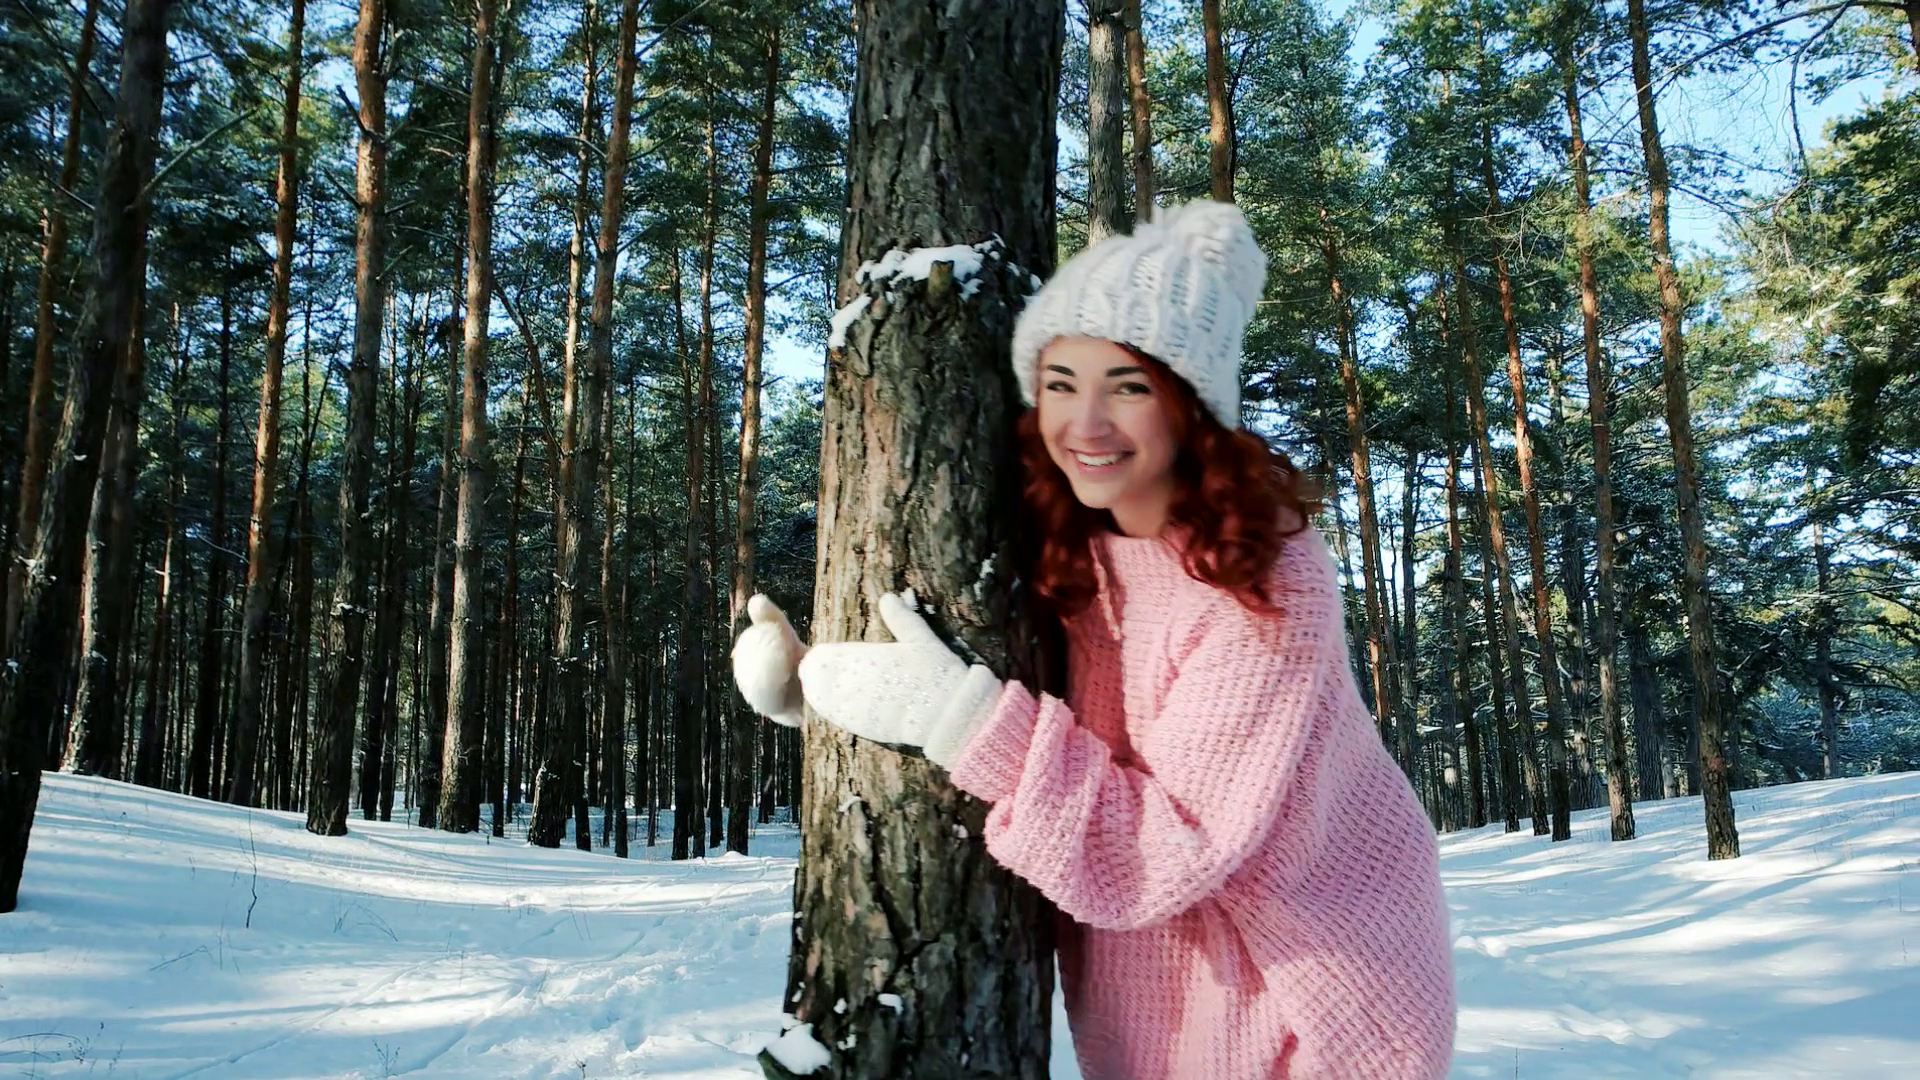 Cute girl walking in winter forest, a woman with red hair, running ...